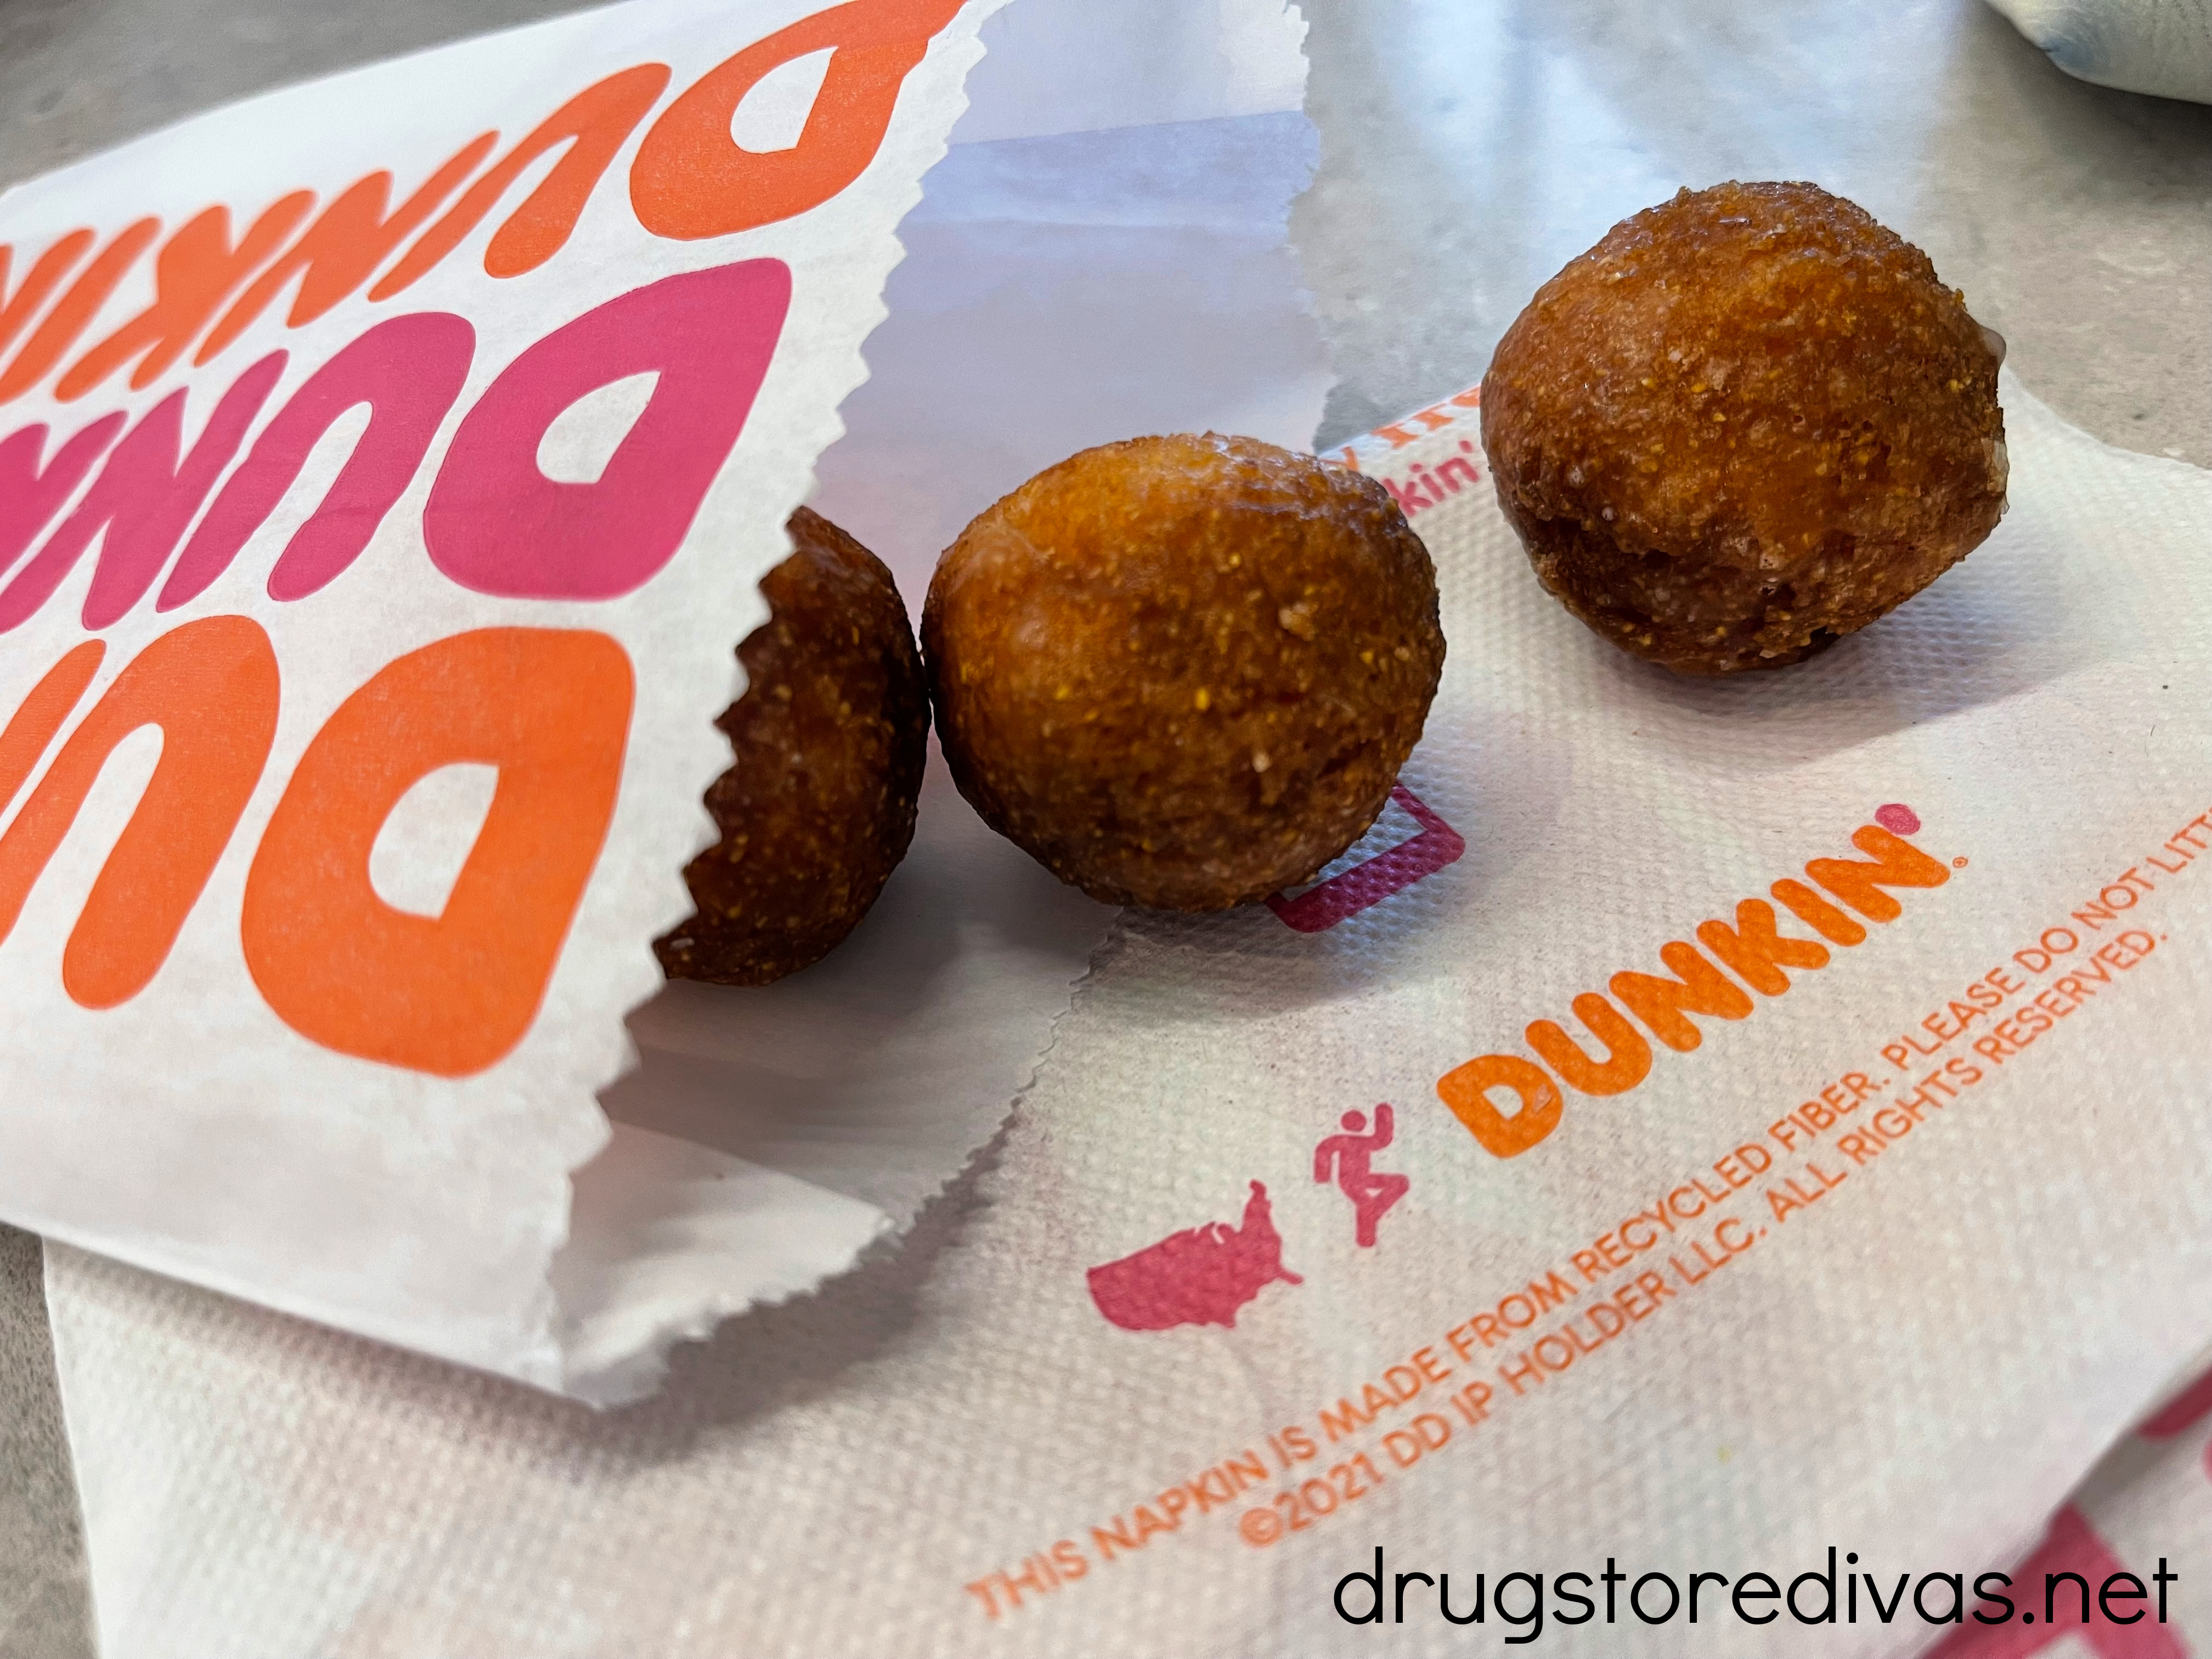 Three Dunkin' munchkins and their packaging.